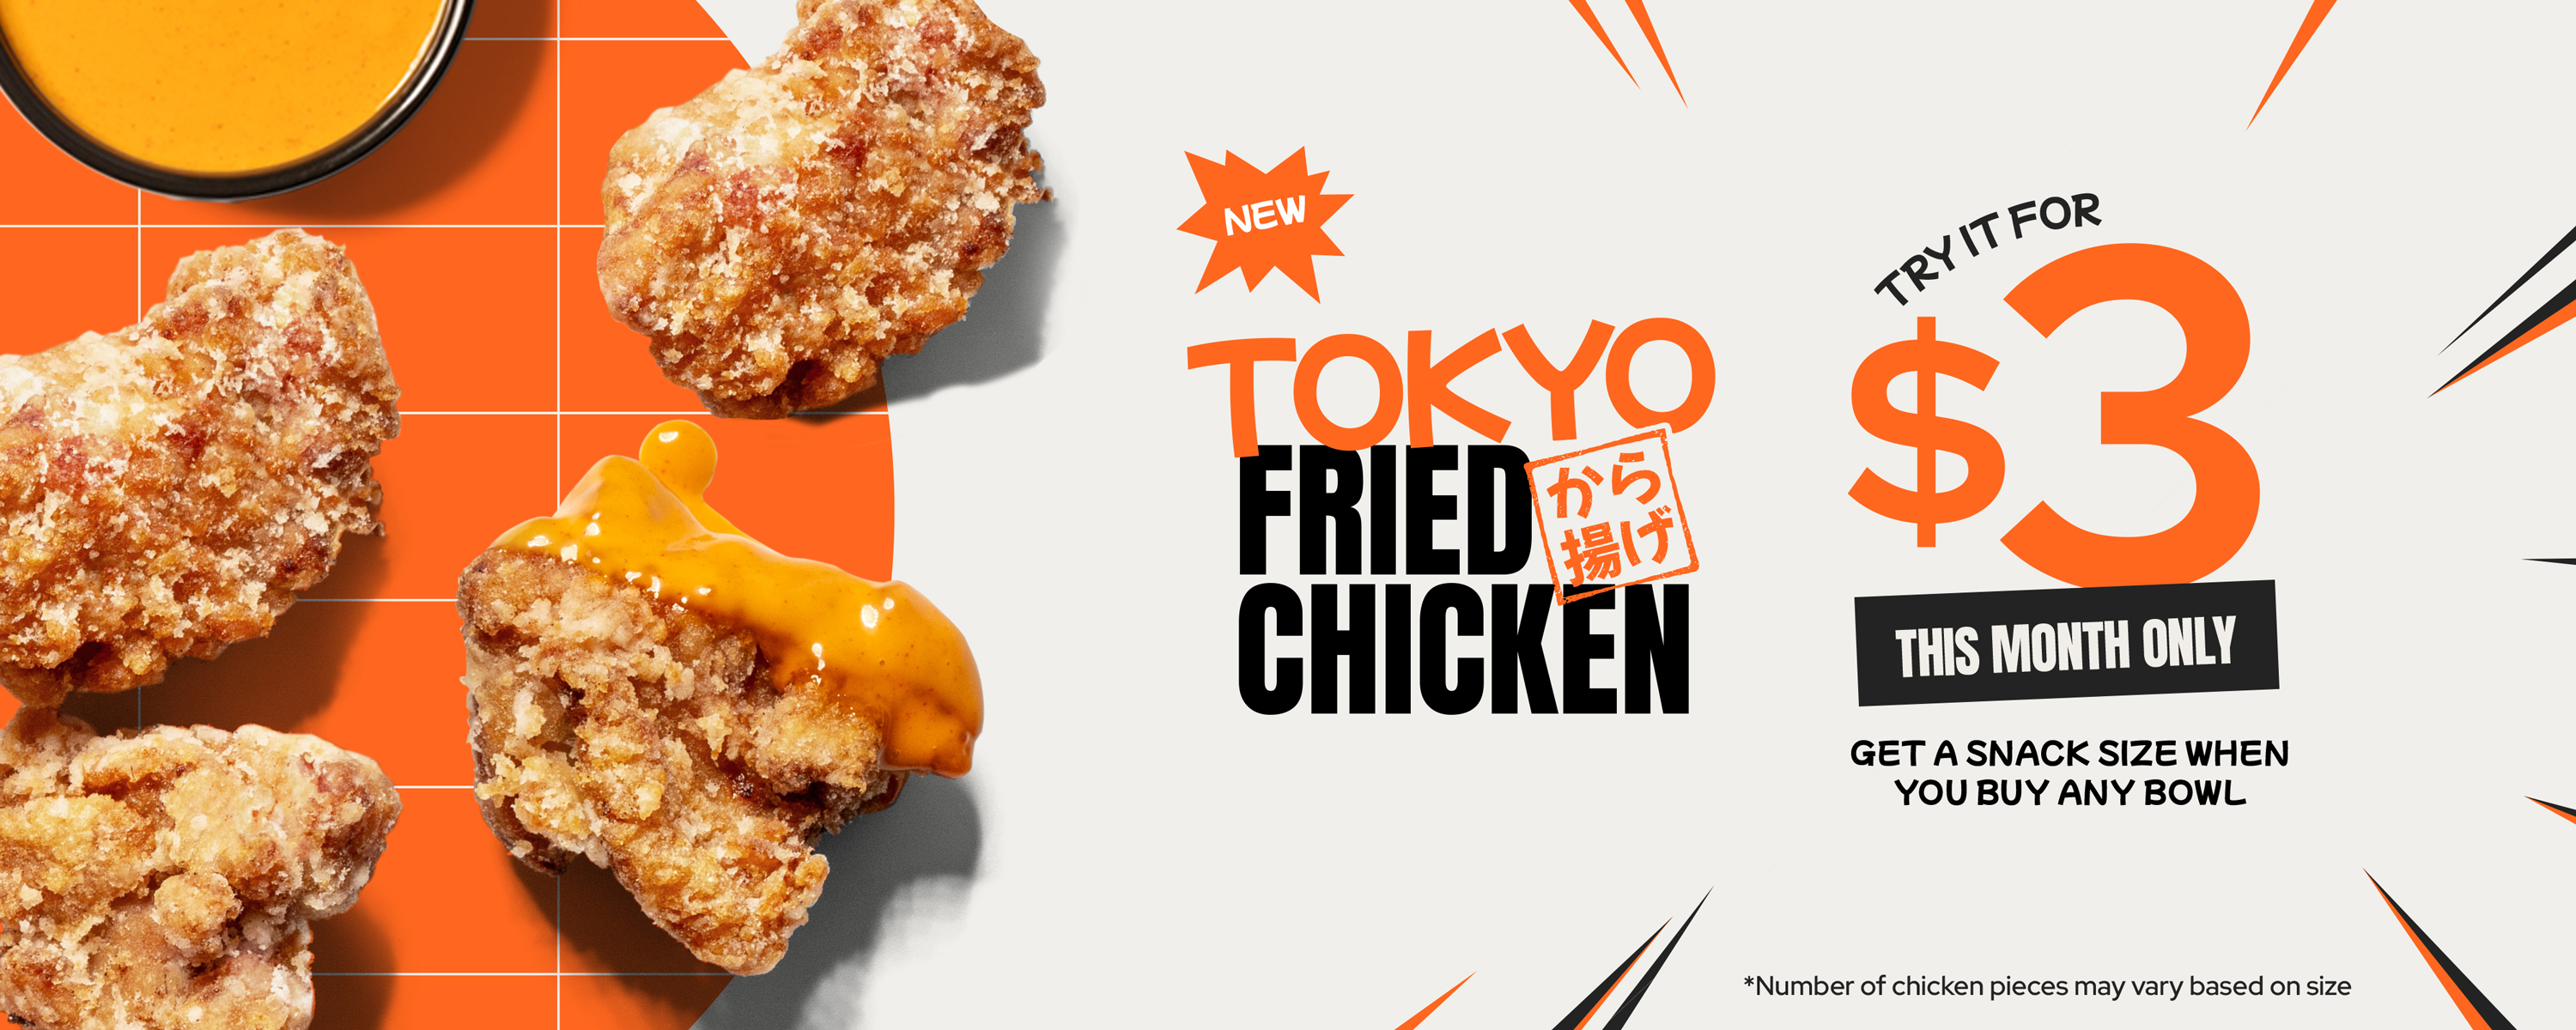 NEW! TOKYO FRIED CHICKEN. Try it for $3 This Month Only. Get a snake size when you buy any bowl. *Number of chicken pieces may vary based on size.